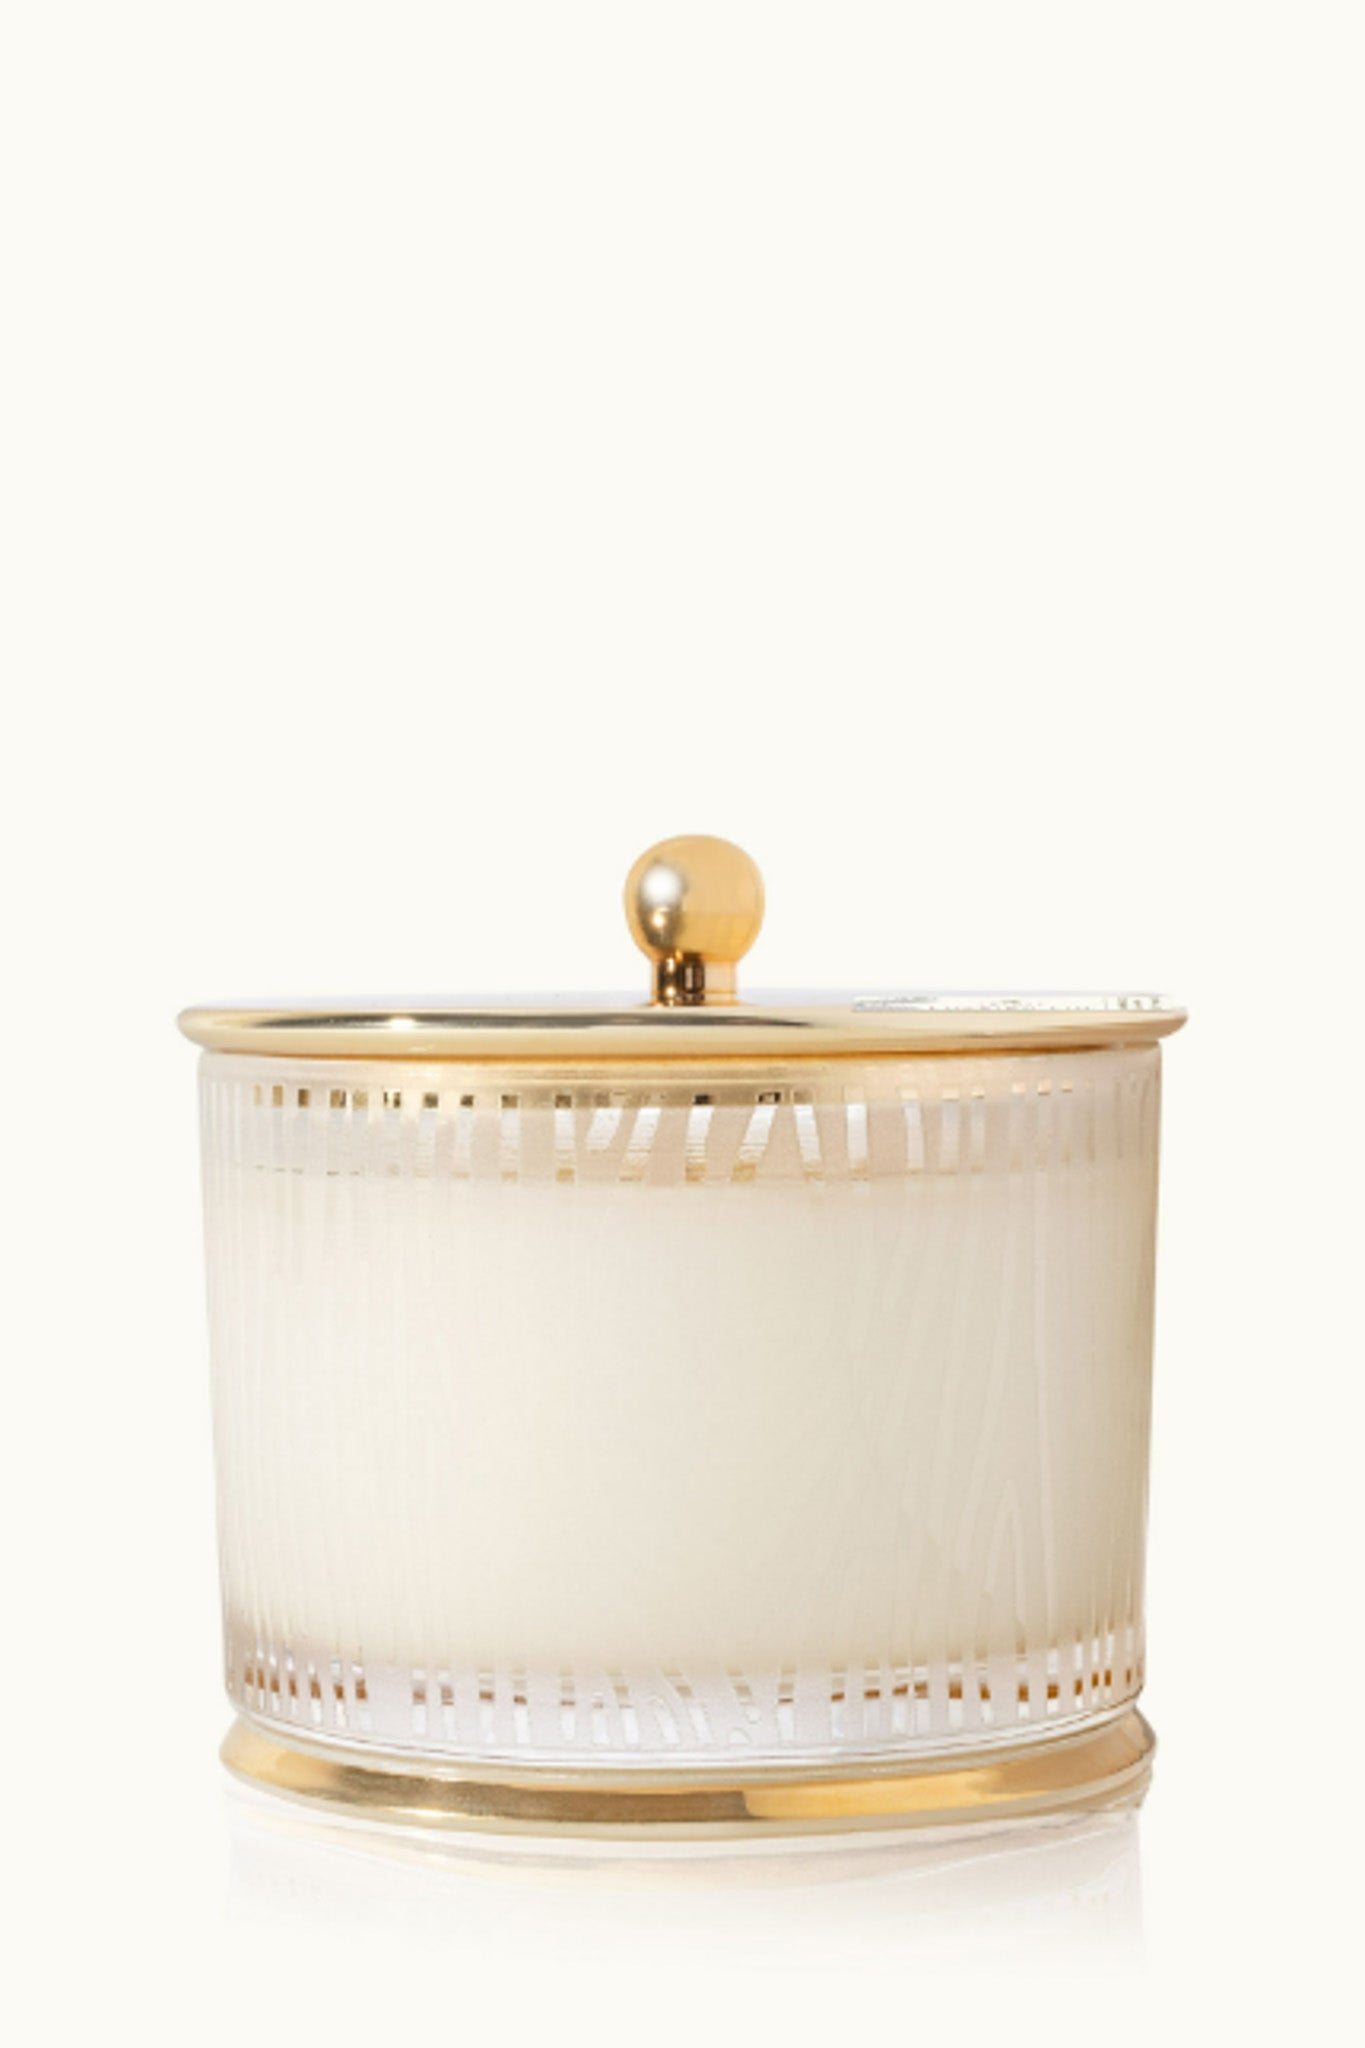 Frasier Fir Gilded Frosted Wood Grain Candle (9oz)